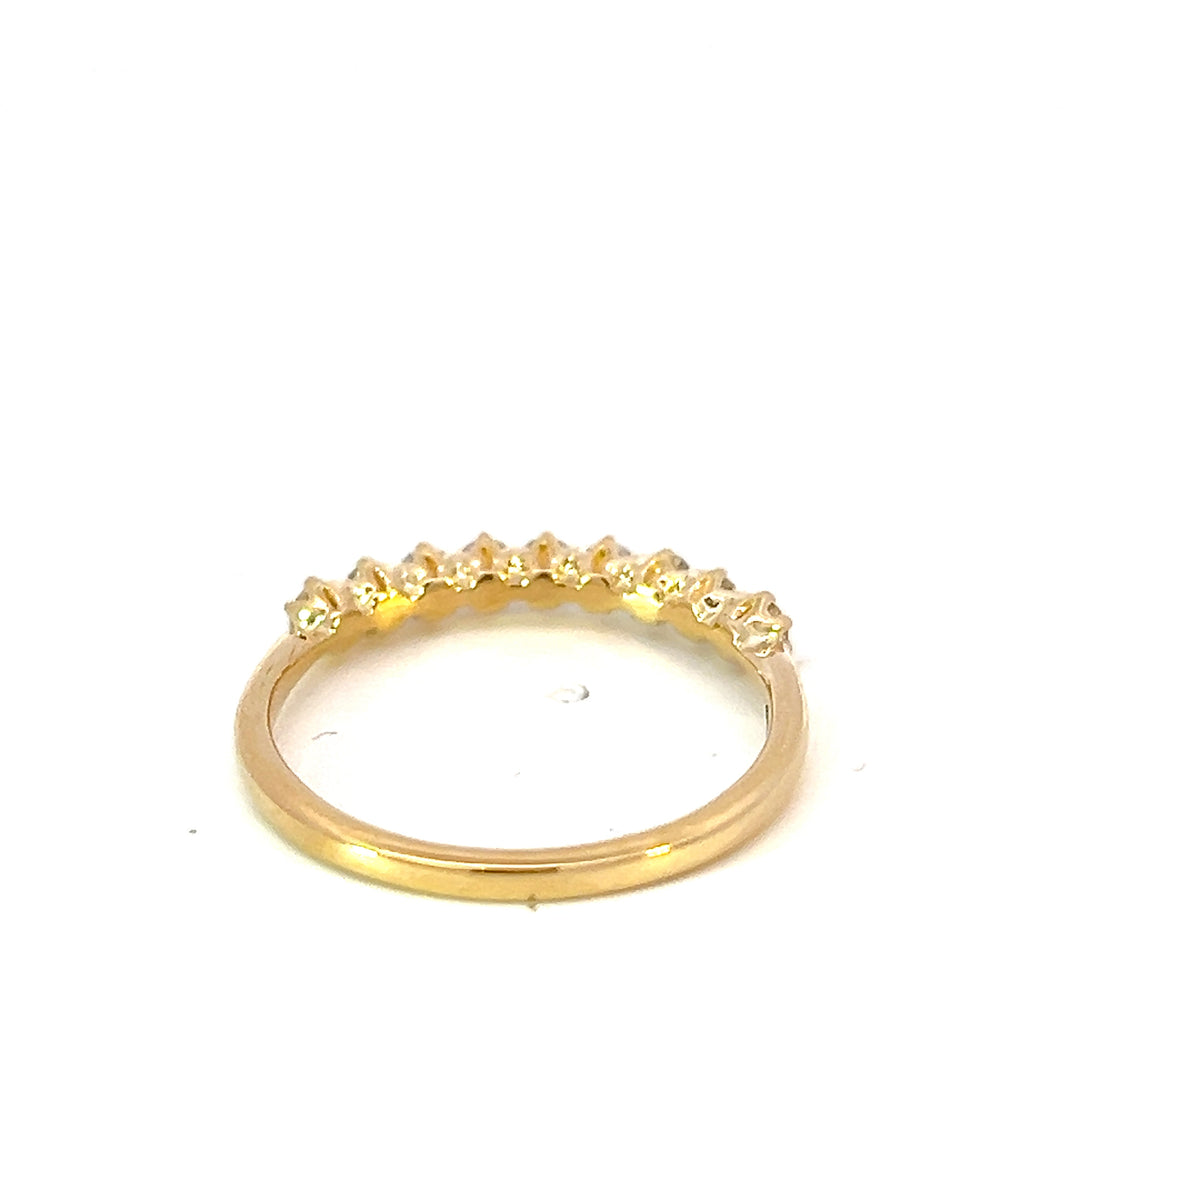 14K Yellow Gold 0.36cttw Canadian Diamond Ring - size 6.5